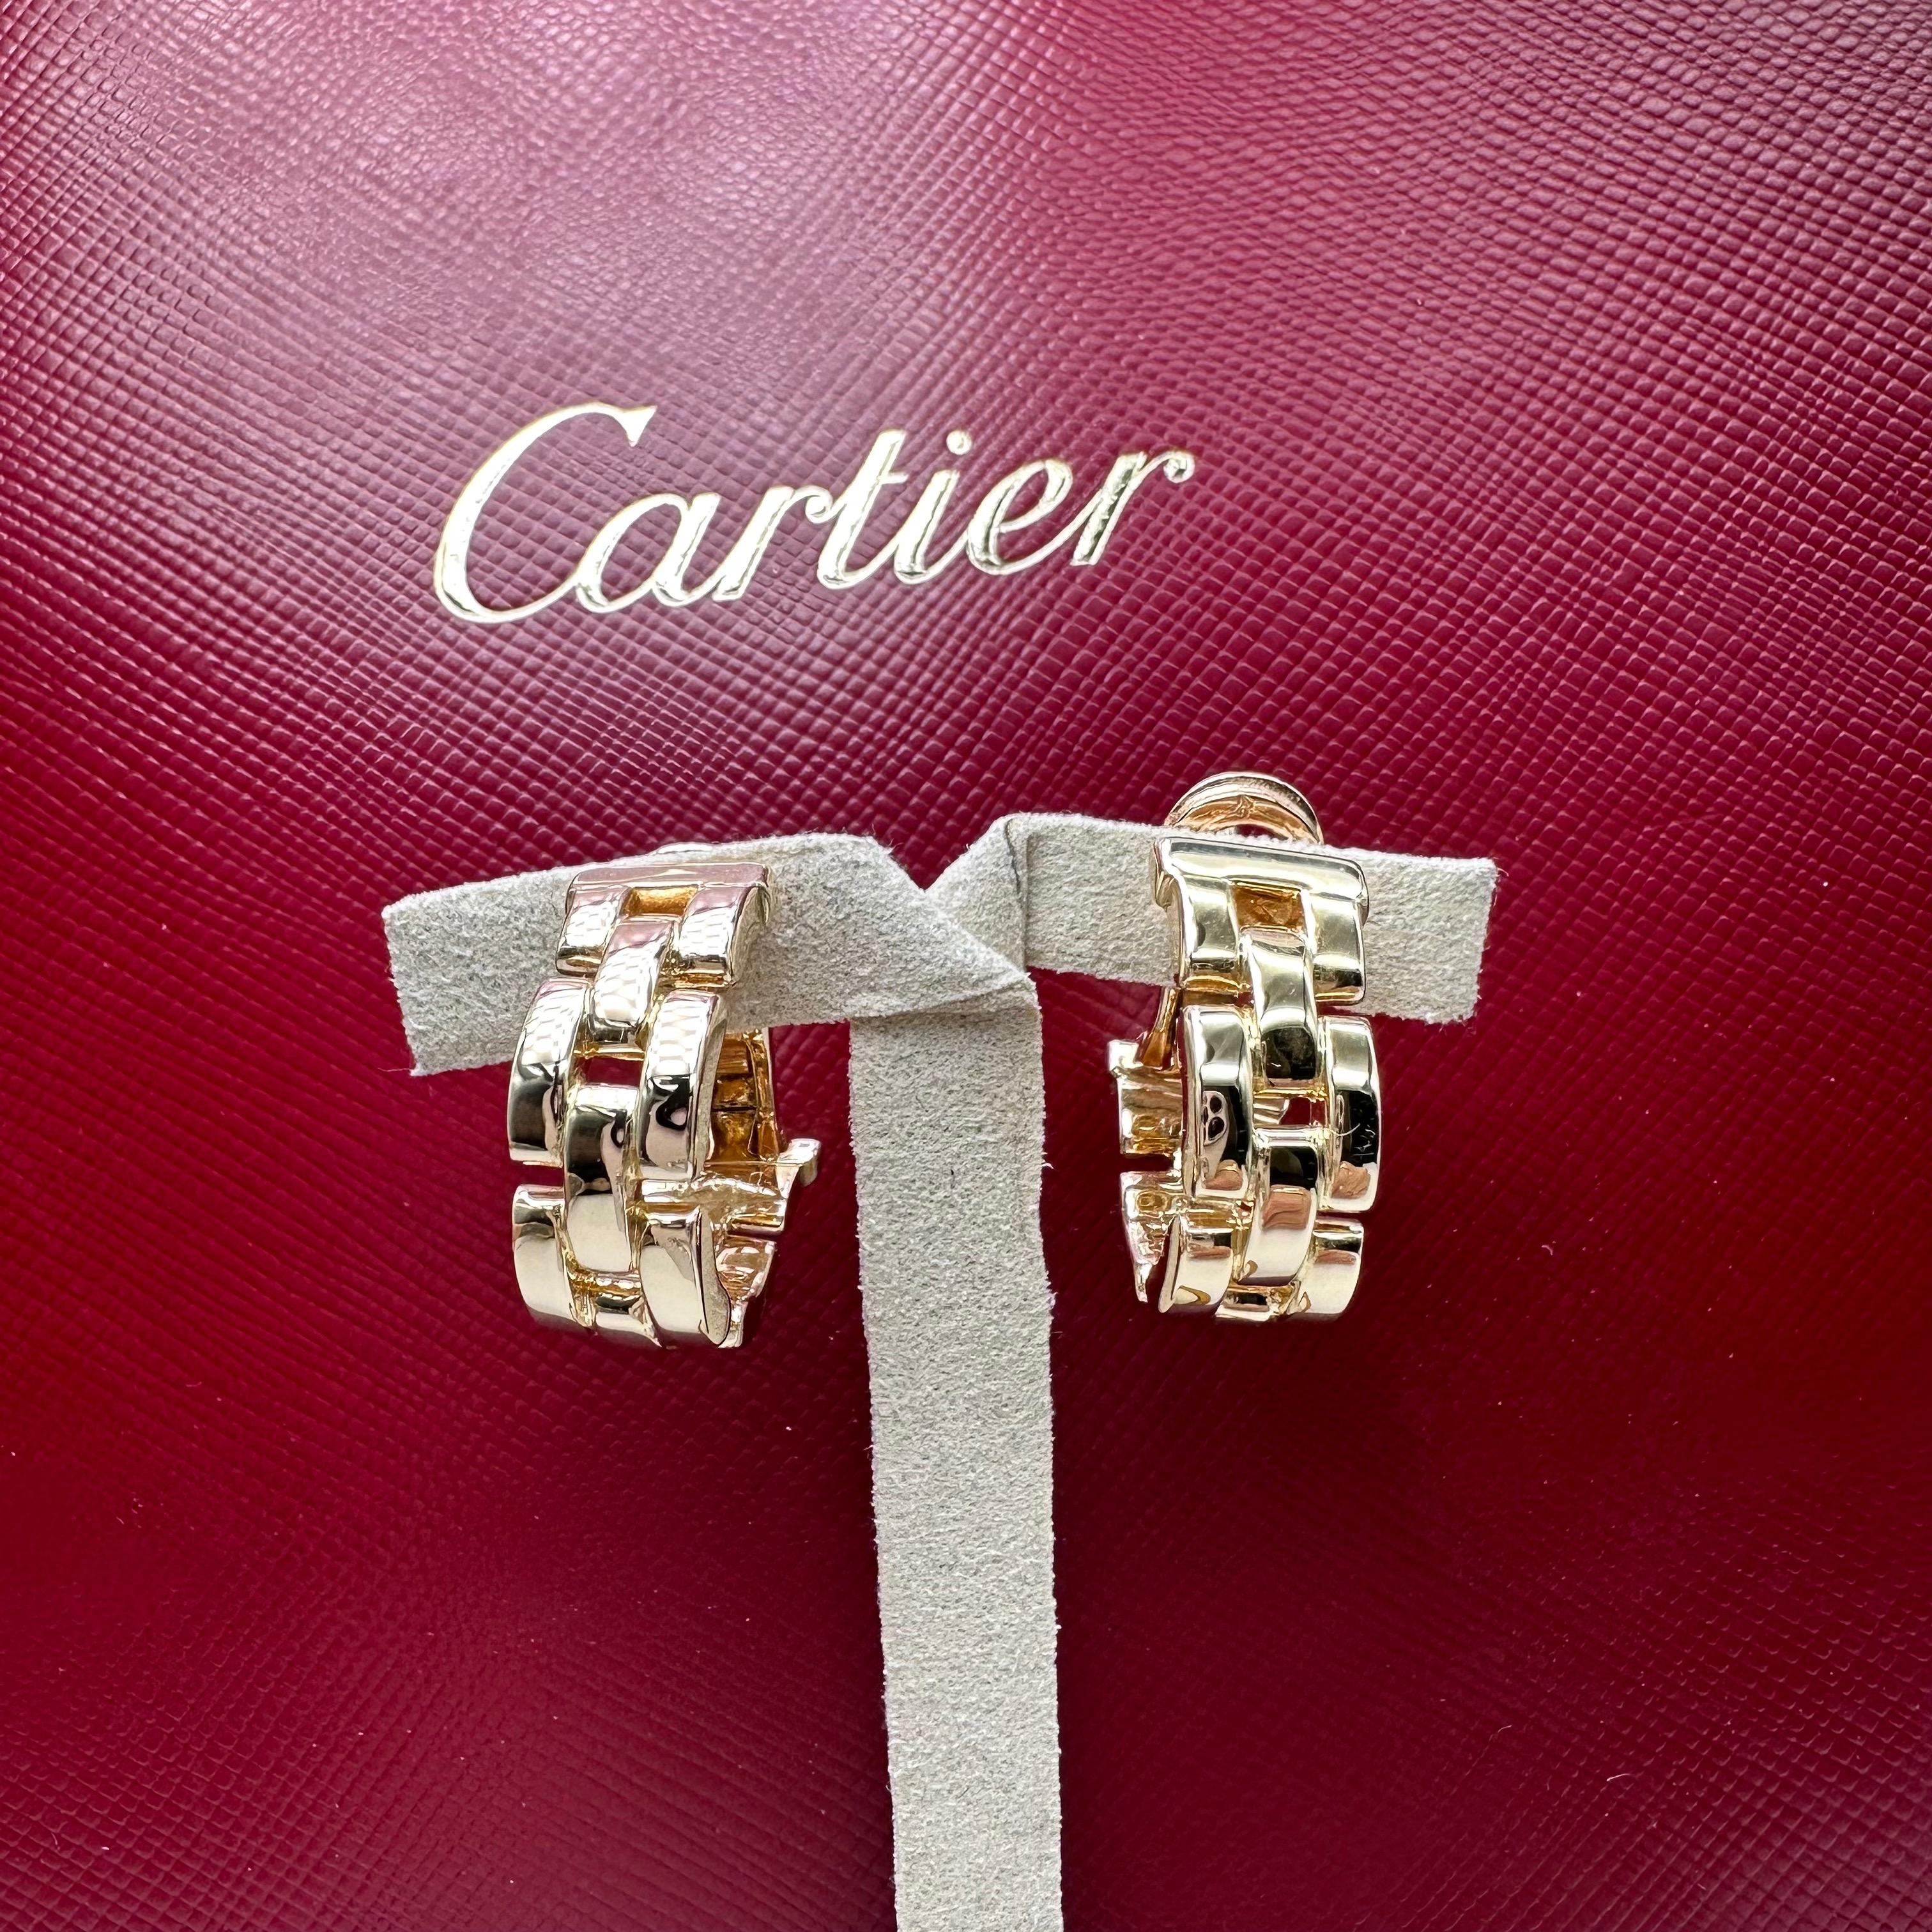 Cartier Maillon Panthere Hoop Earrings
Style:  Hoop
Ref. number:  D16285
Metal:  18kt Yellow Gold 13.9 grams
Size / Measurements:  15 X 16 MM 
Hallmark:  Cartoer 750 D16285
Includes:  Cartier Red Jewelry Pouch
Sku#11950TSD